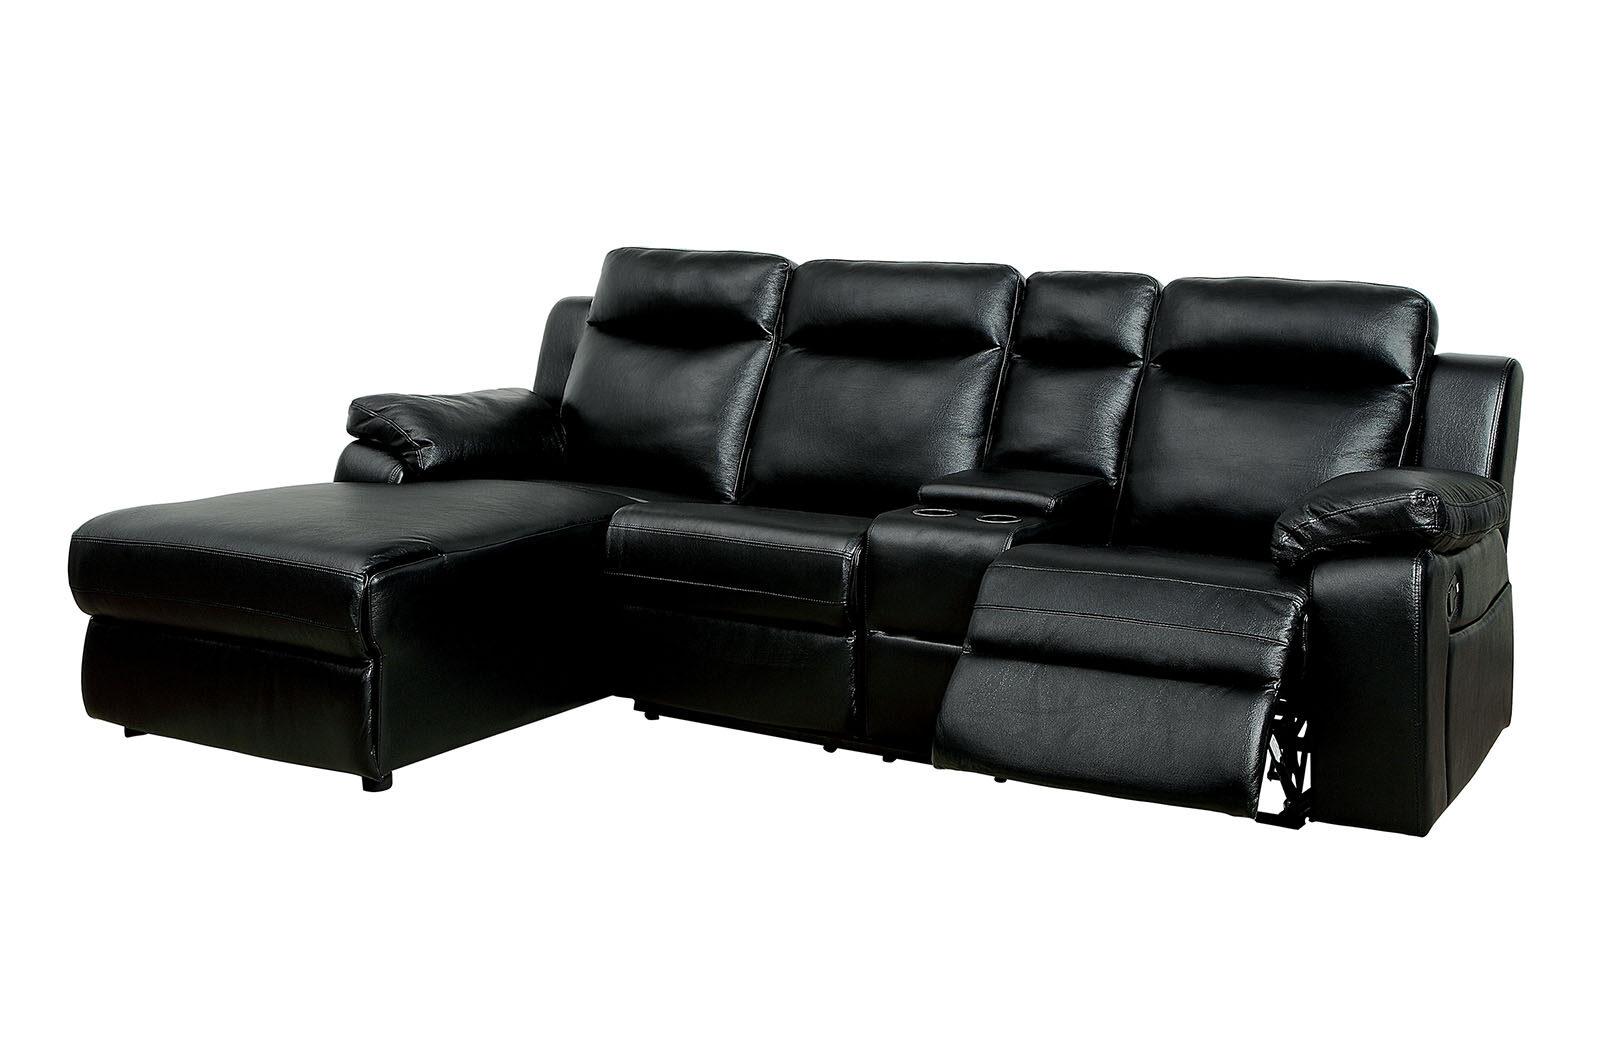 Furniture of America HARDY CM6781BK Recliner Sectional